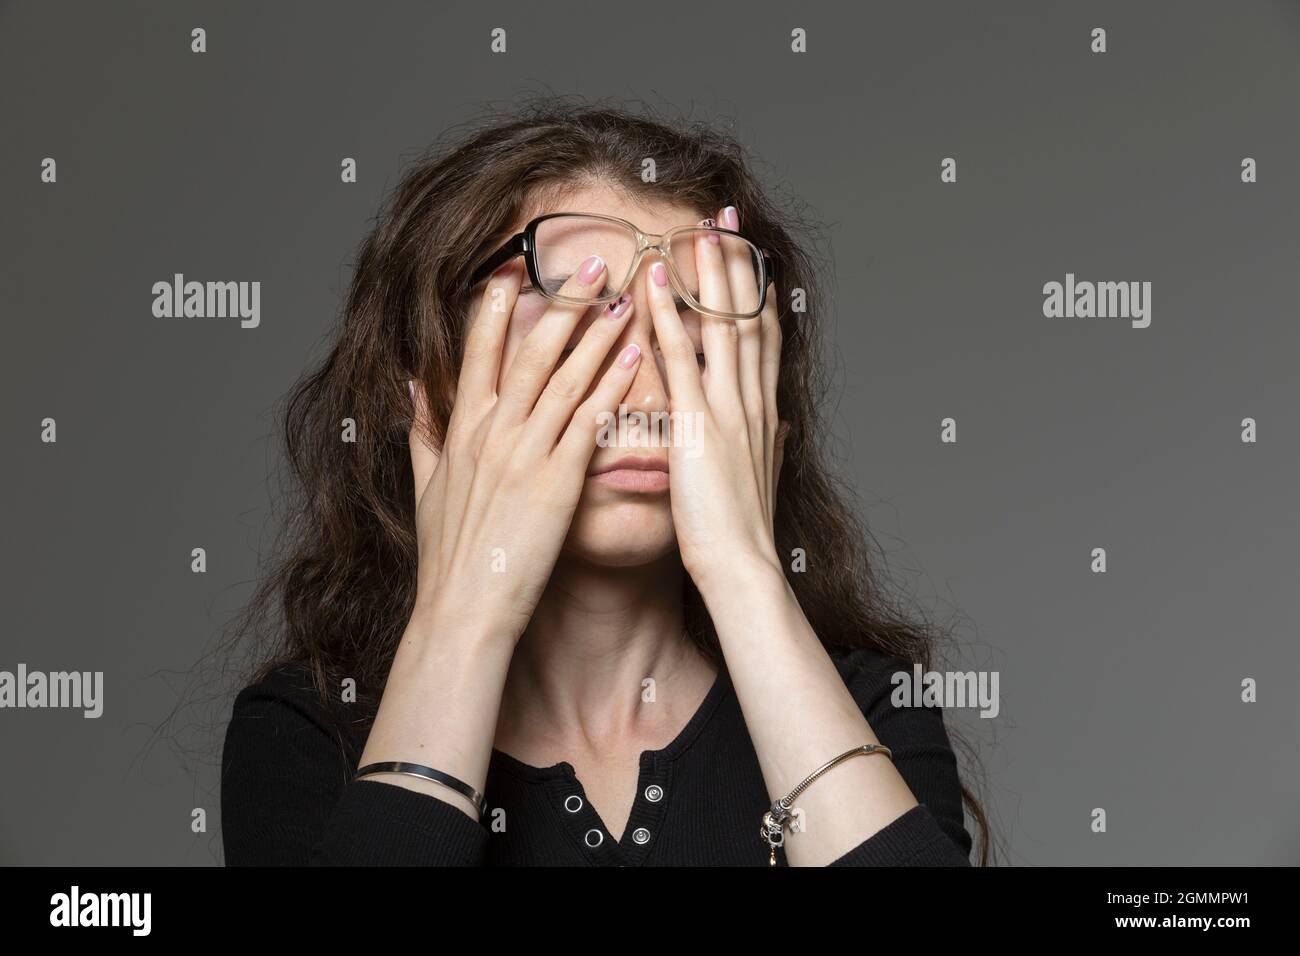 Tired young woman rubbing eyes Stock Photo